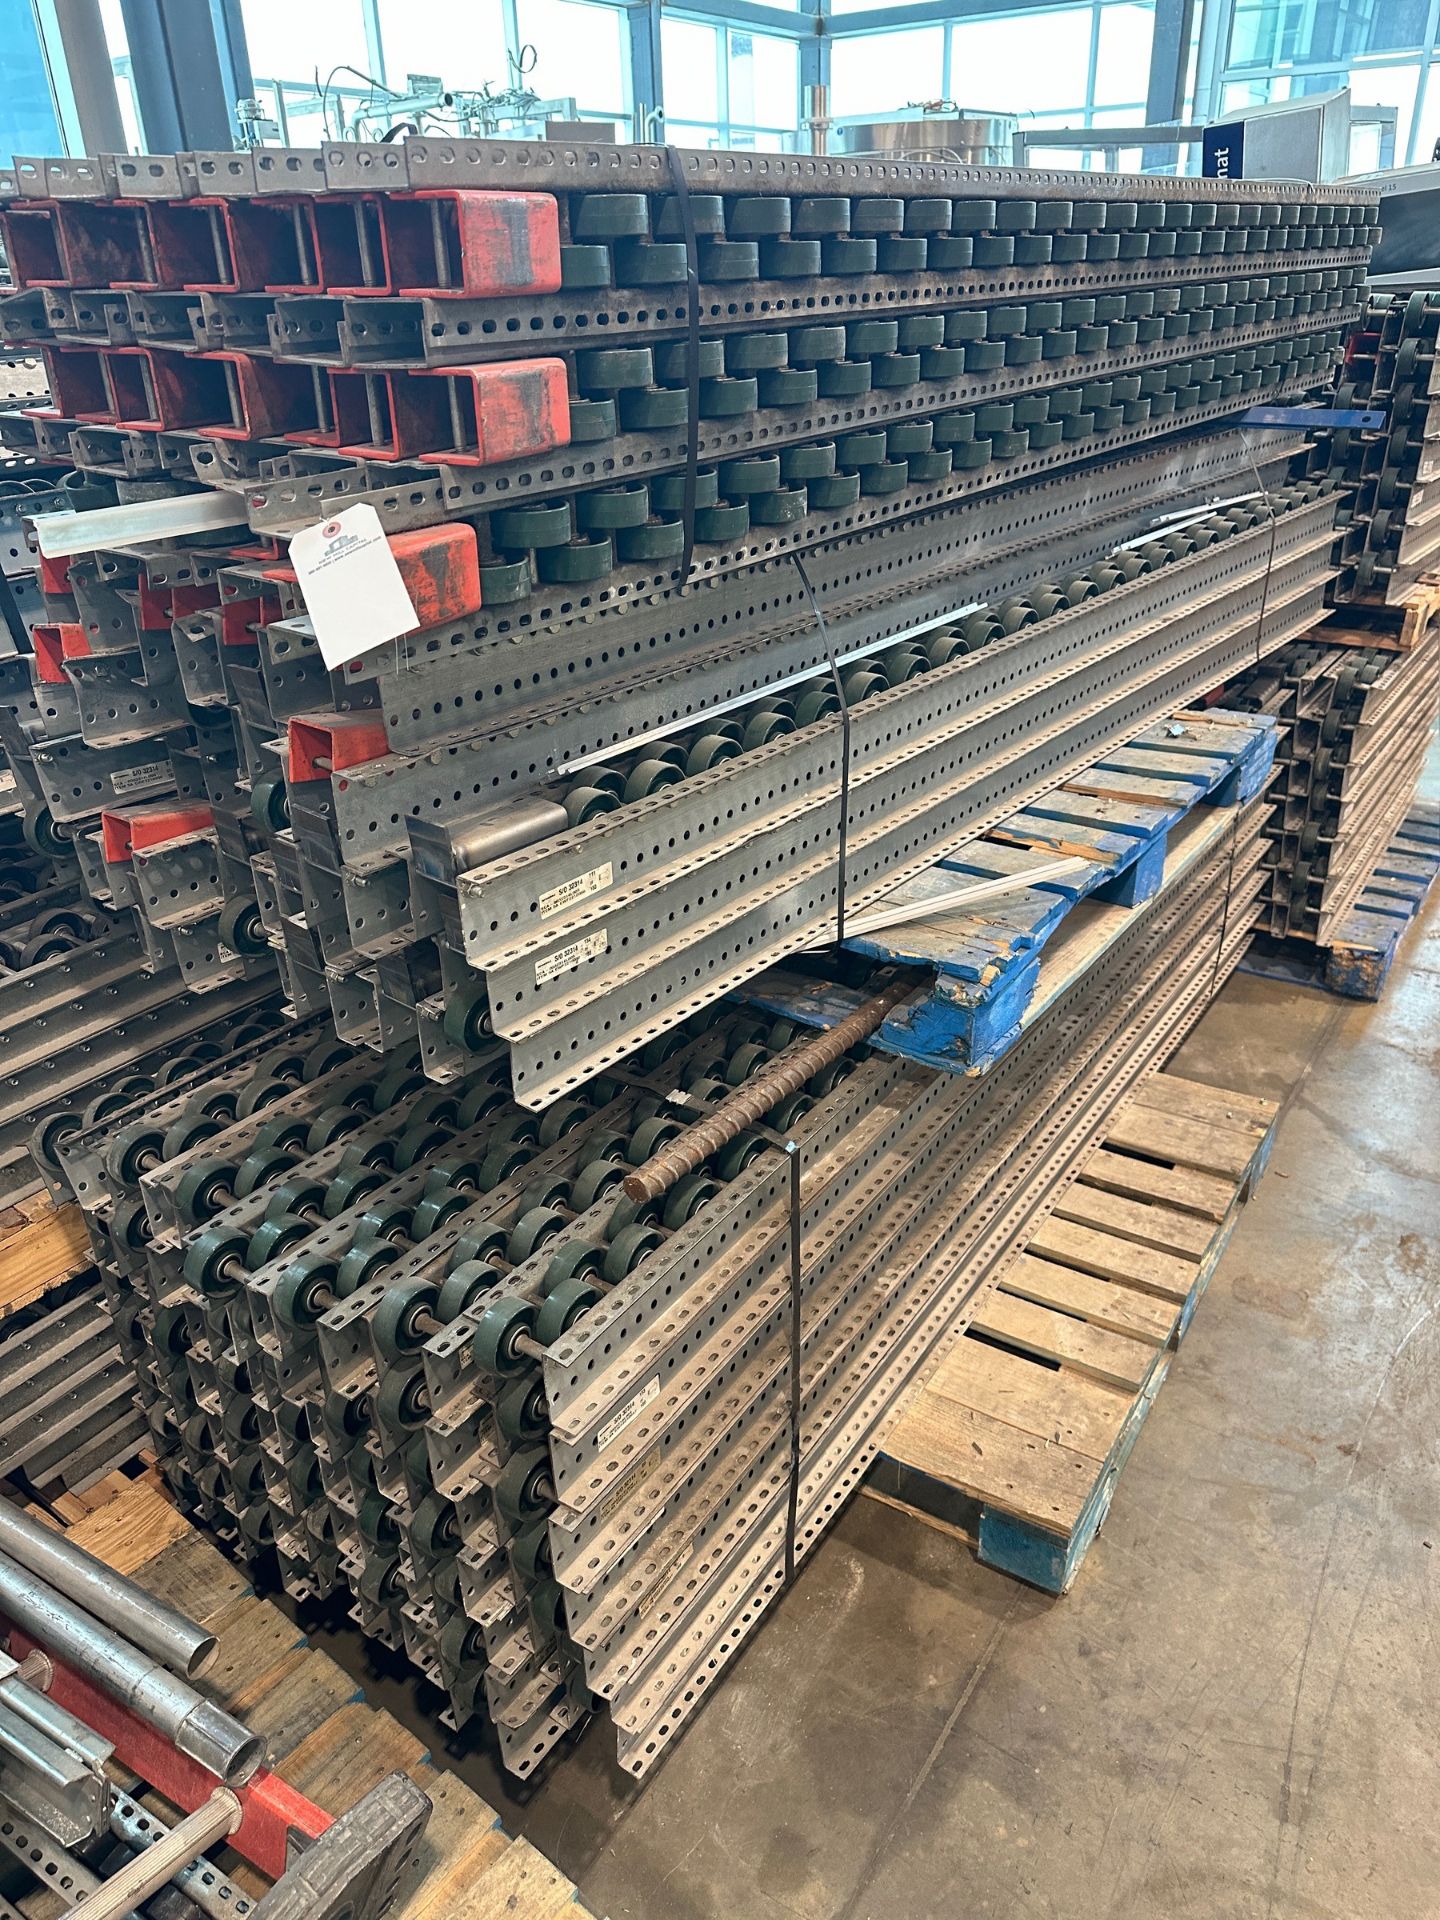 Lot of Interroll Pallet Racking Rollers - Approx. (150) Total Pieces at 5" x 100" | Rig Fee $350